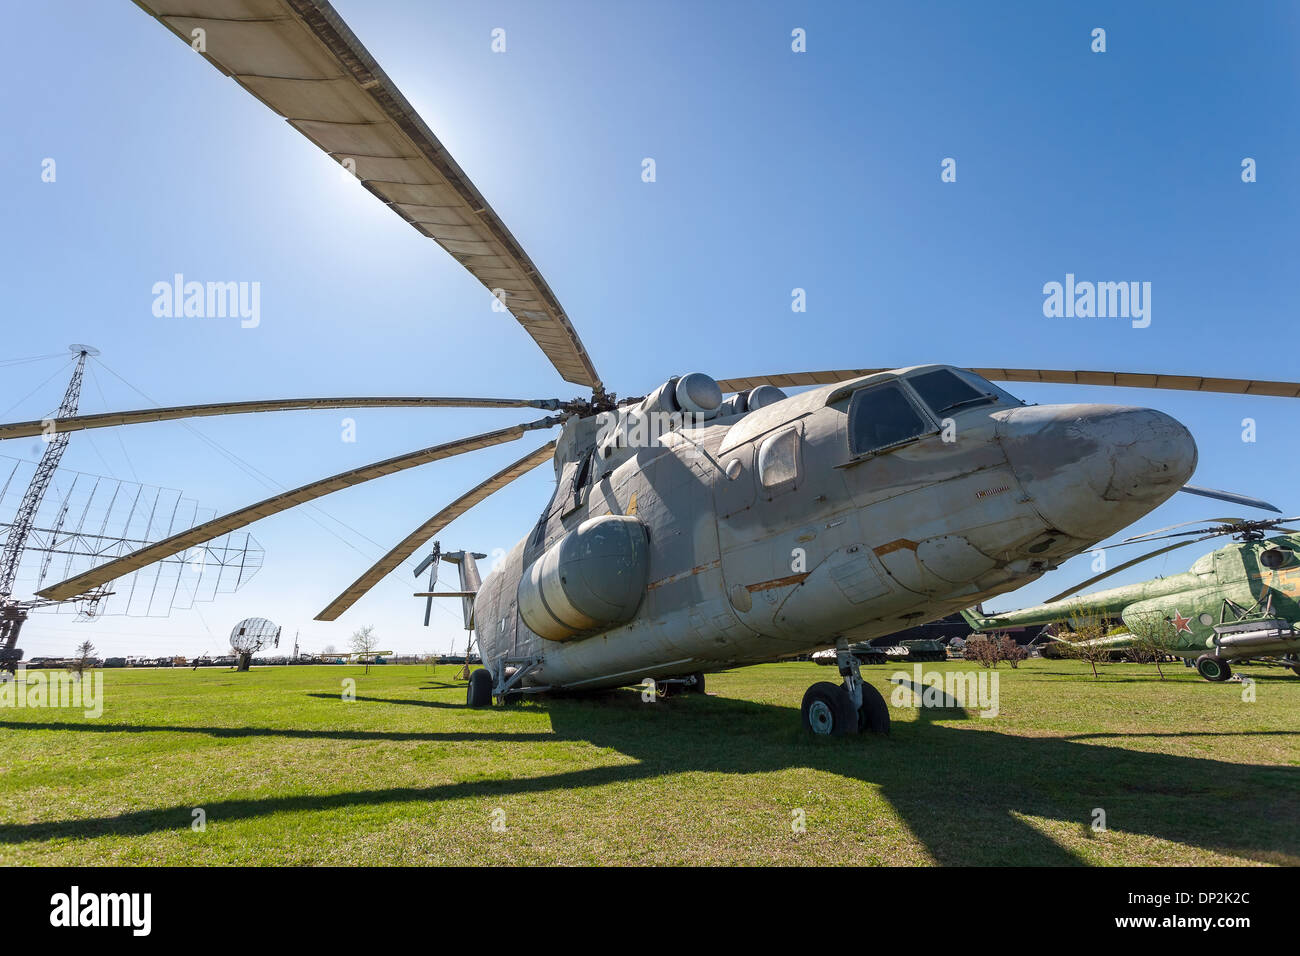 The heavy Russian military transport helicopter Mi-26 'Halo' Stock Photo